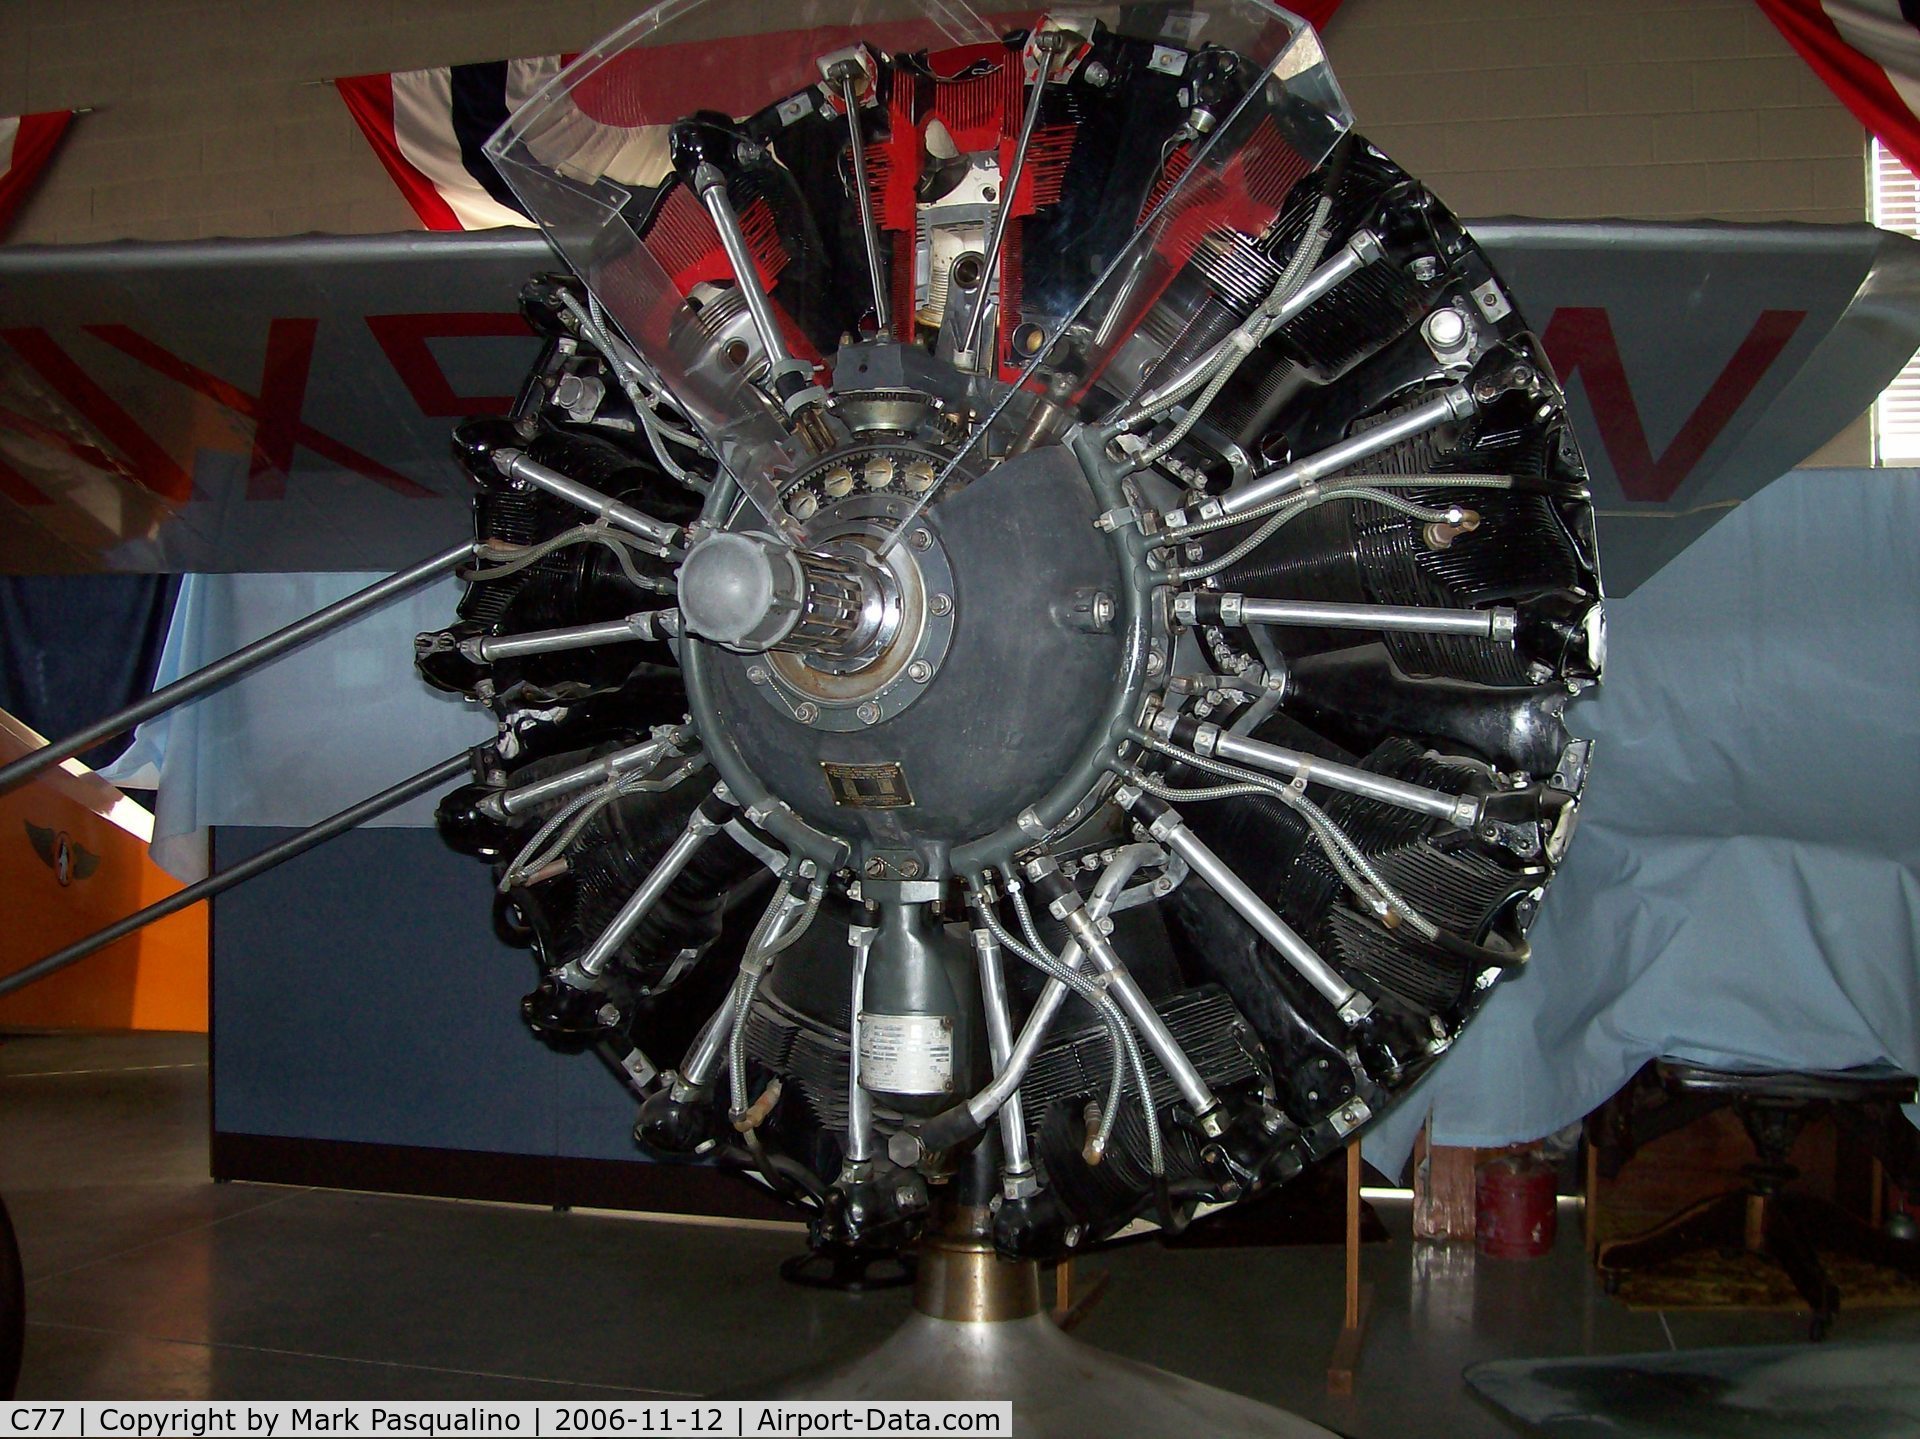 Poplar Grove Airport (C77) - R-1820-97 engine on display at local air museum